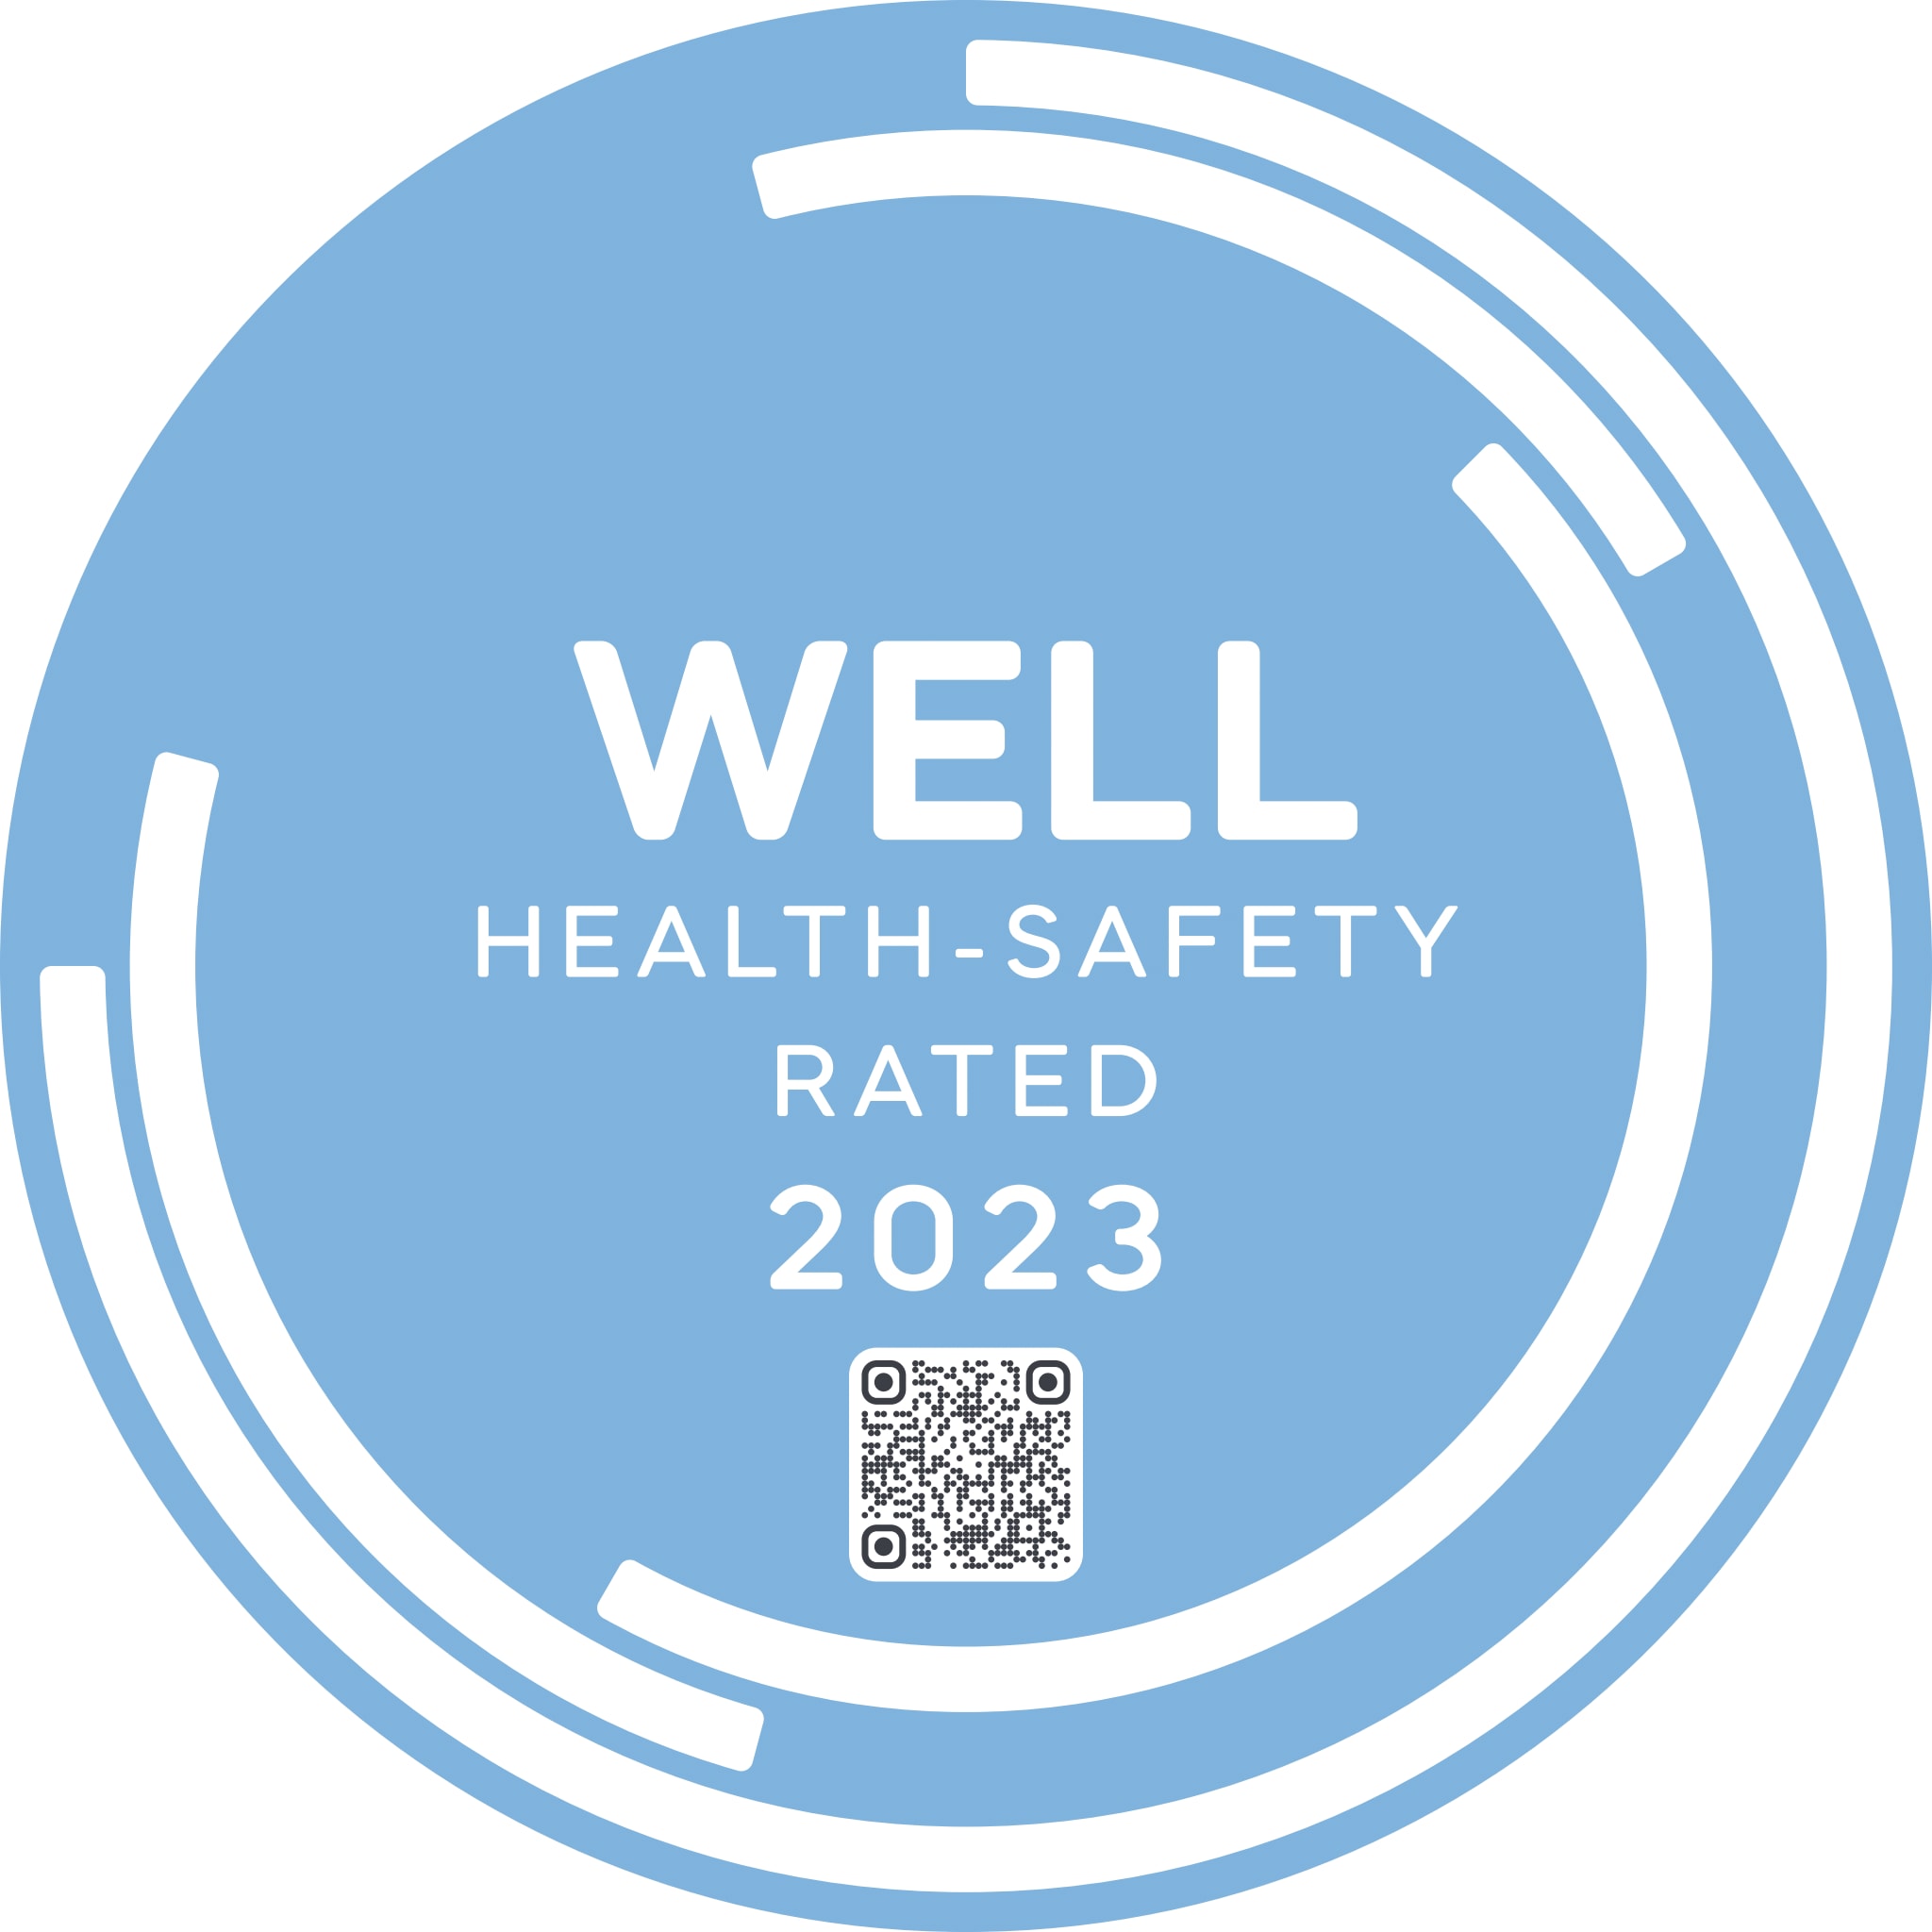 WELL Health and Safety Rating Logo